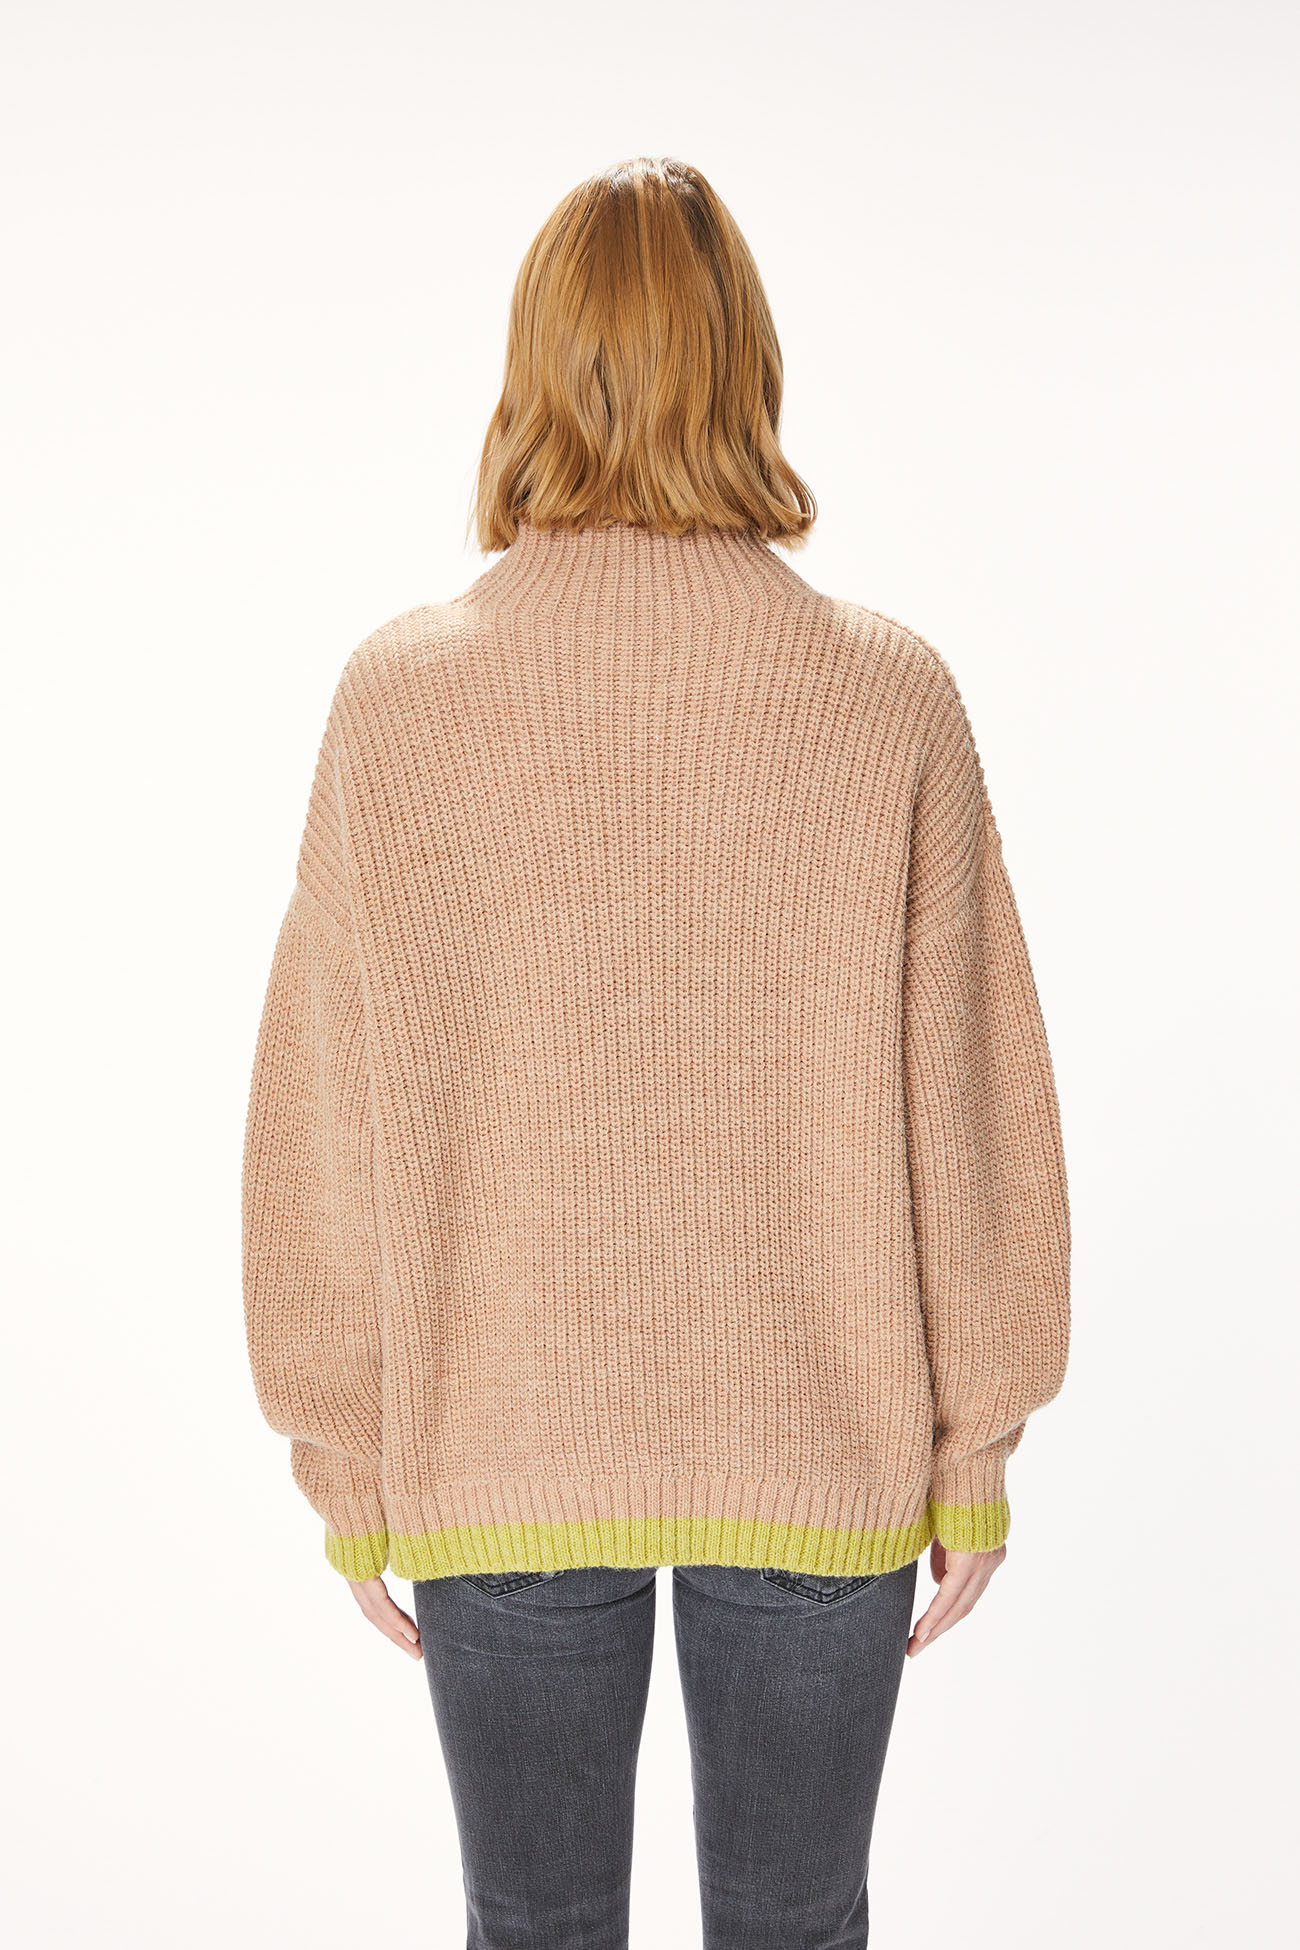 SWEATER 4043 MADE IN PLAIN KNITTED WOOL - BLUSH ROSE - OOF WEAR